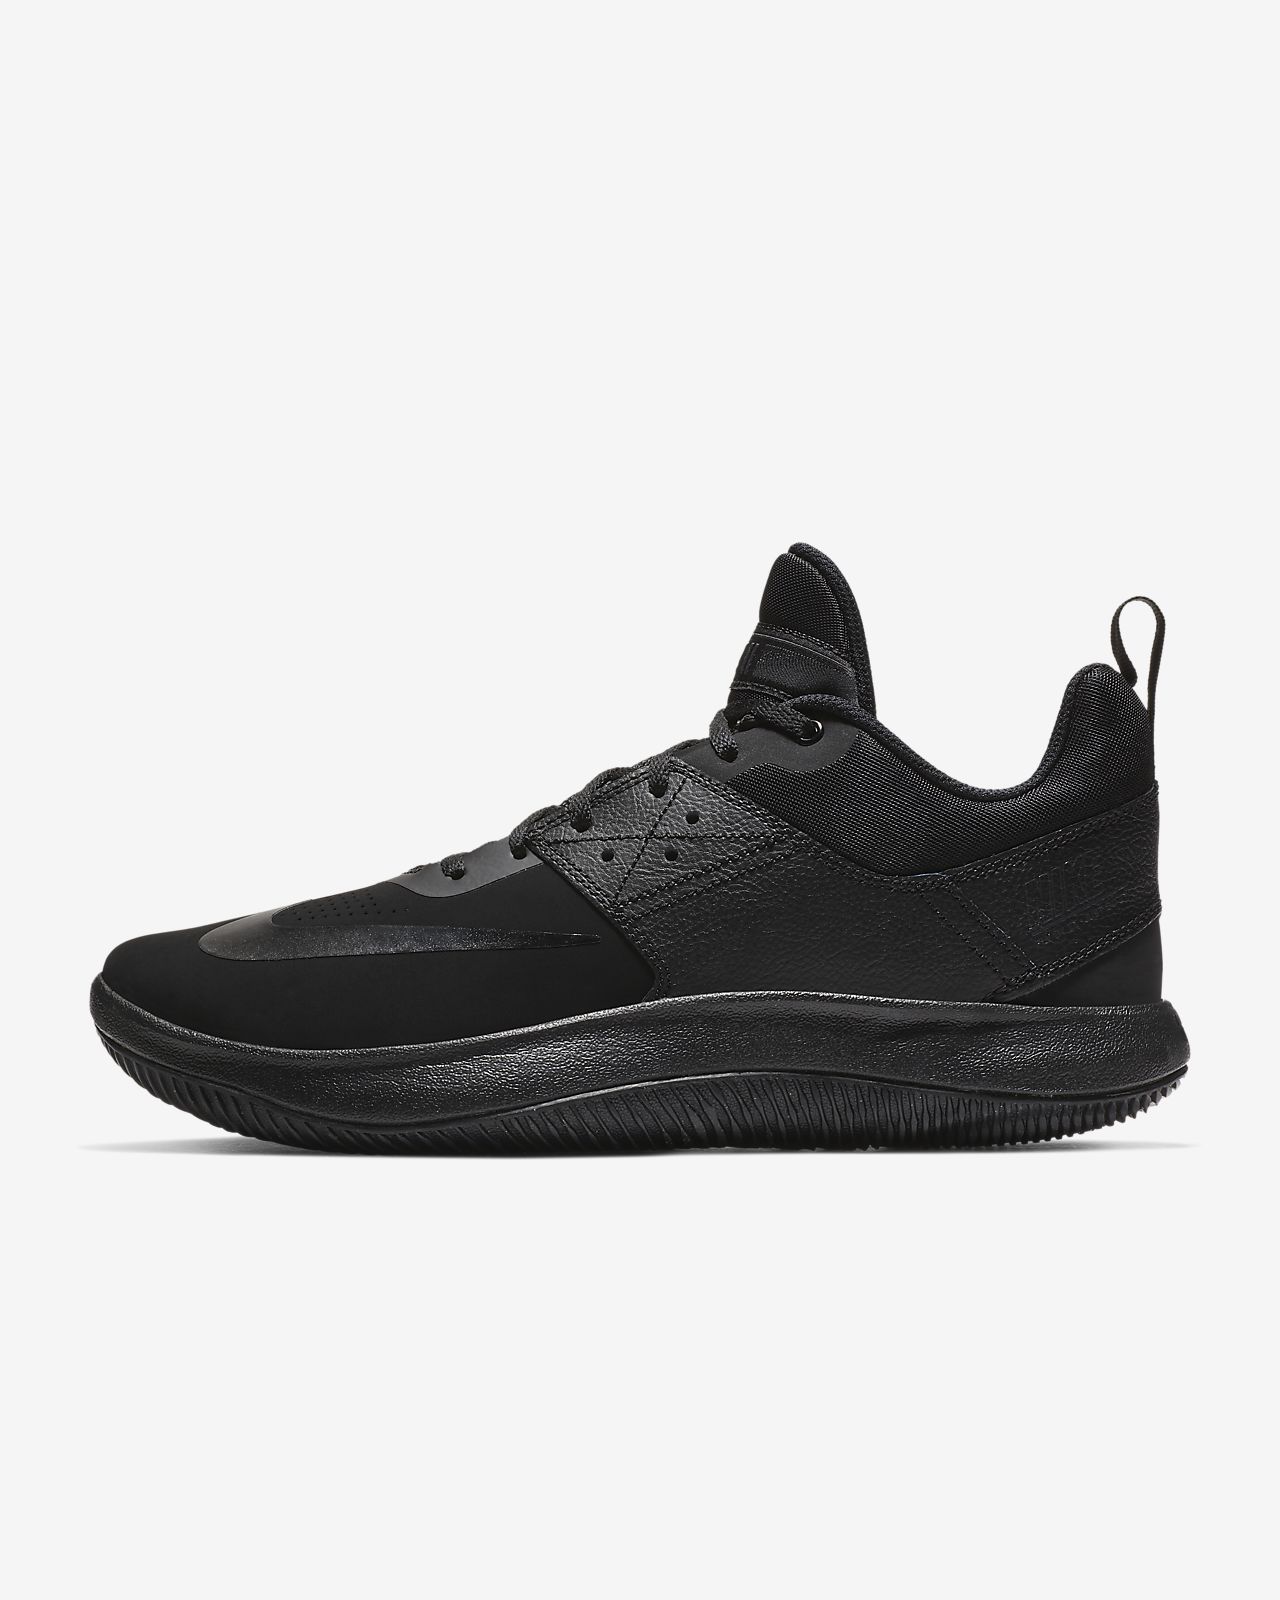 mens low top basketball shoes